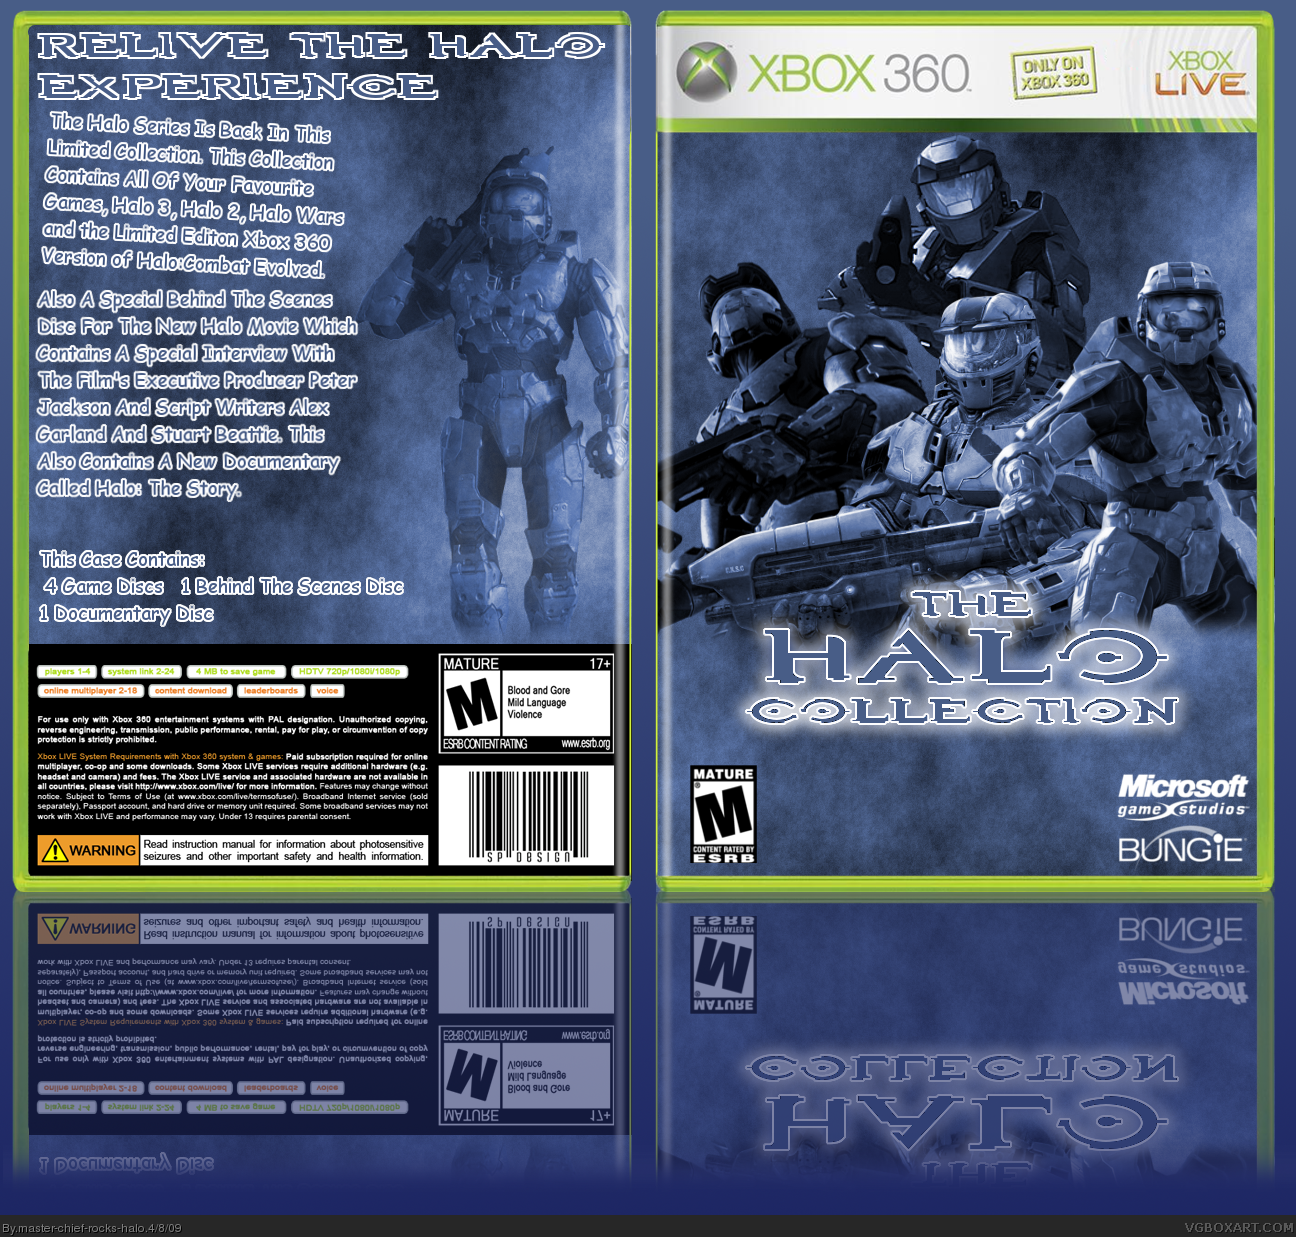 The Halo Collection box cover